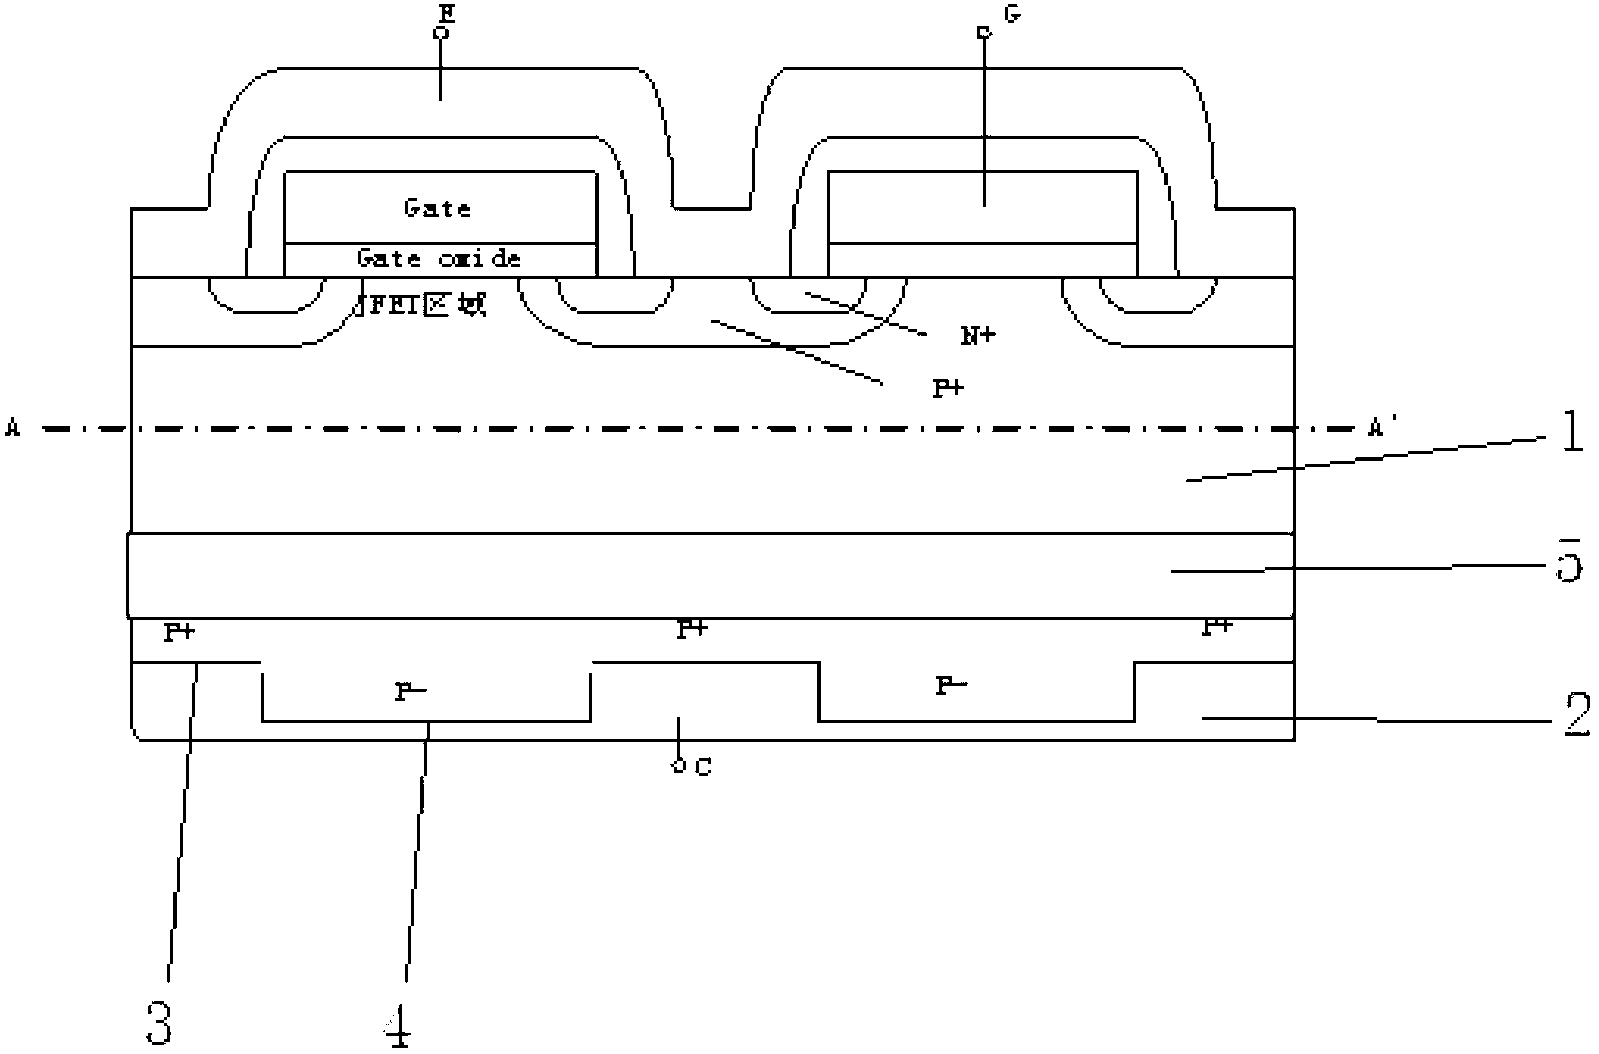 Collector back side structure of insulated gate type bipolar transistor